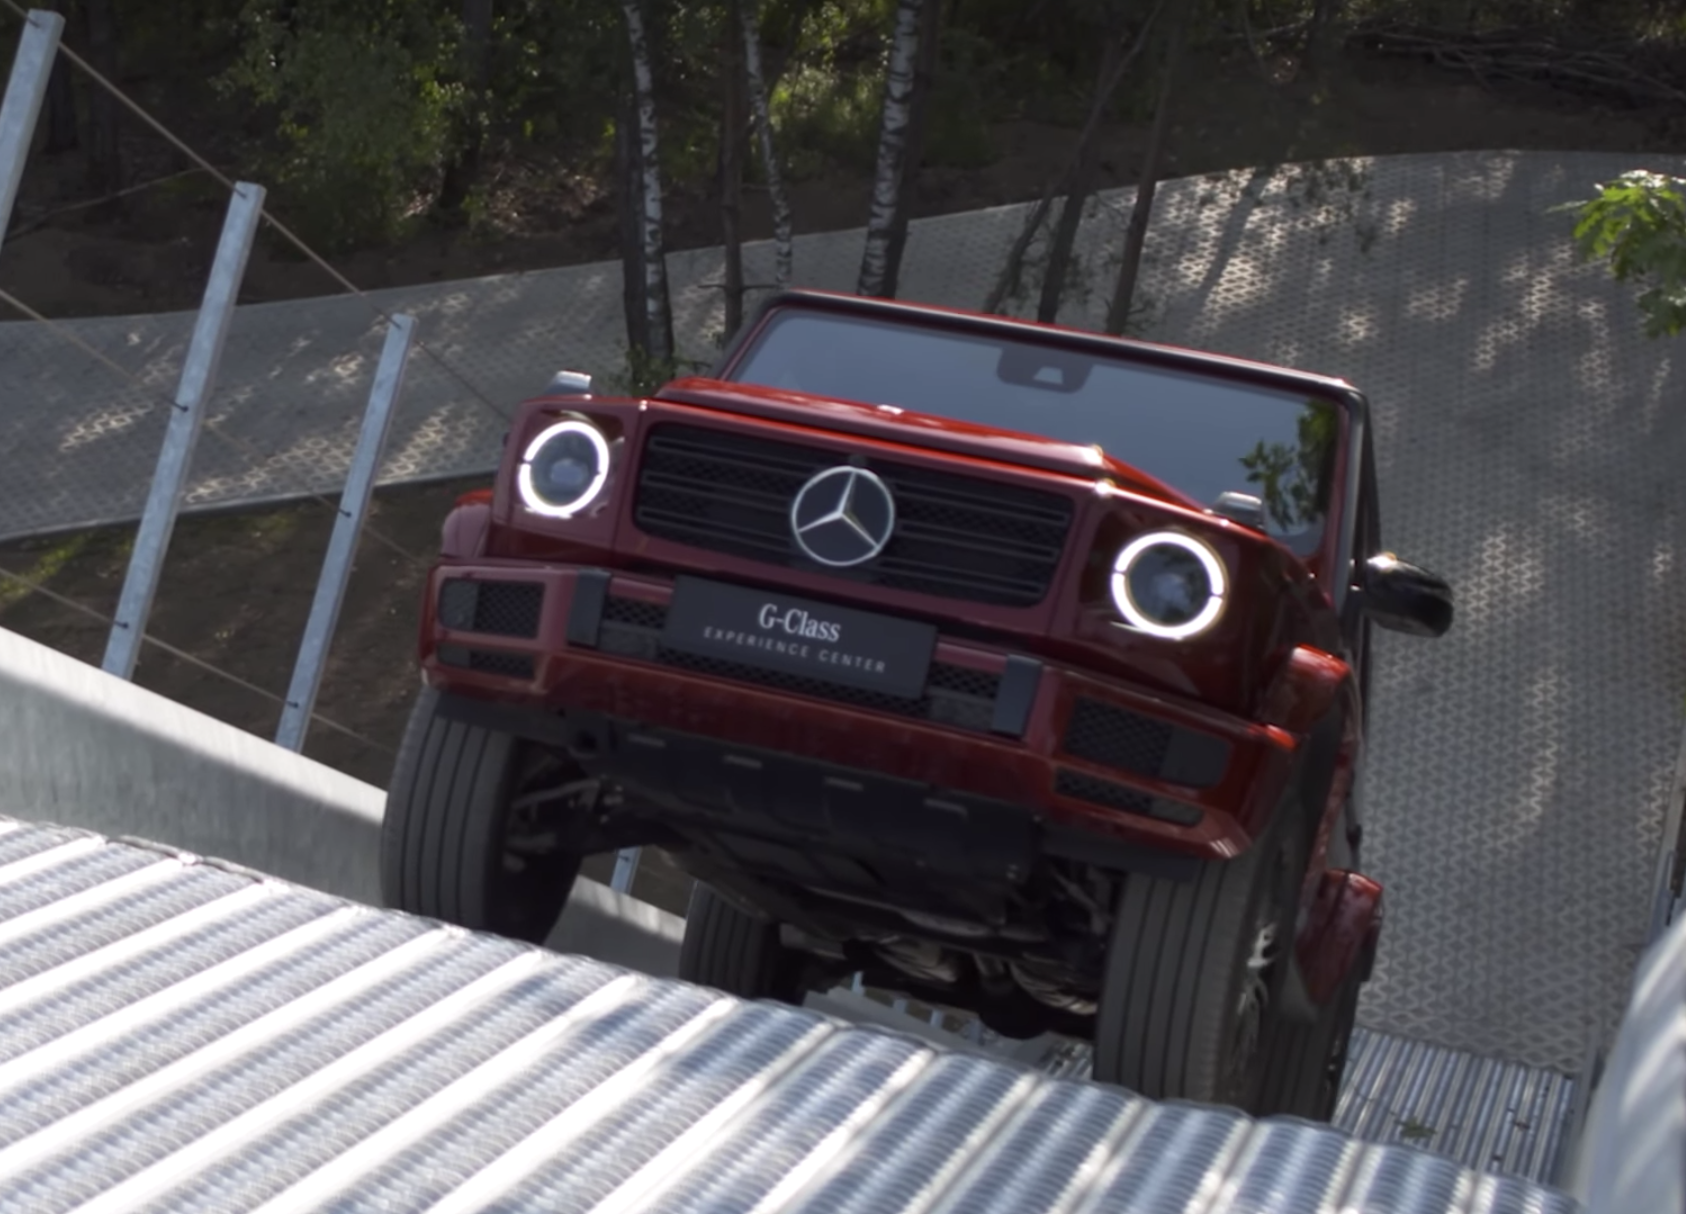 Mercedes-Benz G-Wagen is not in Post Malone's car collection